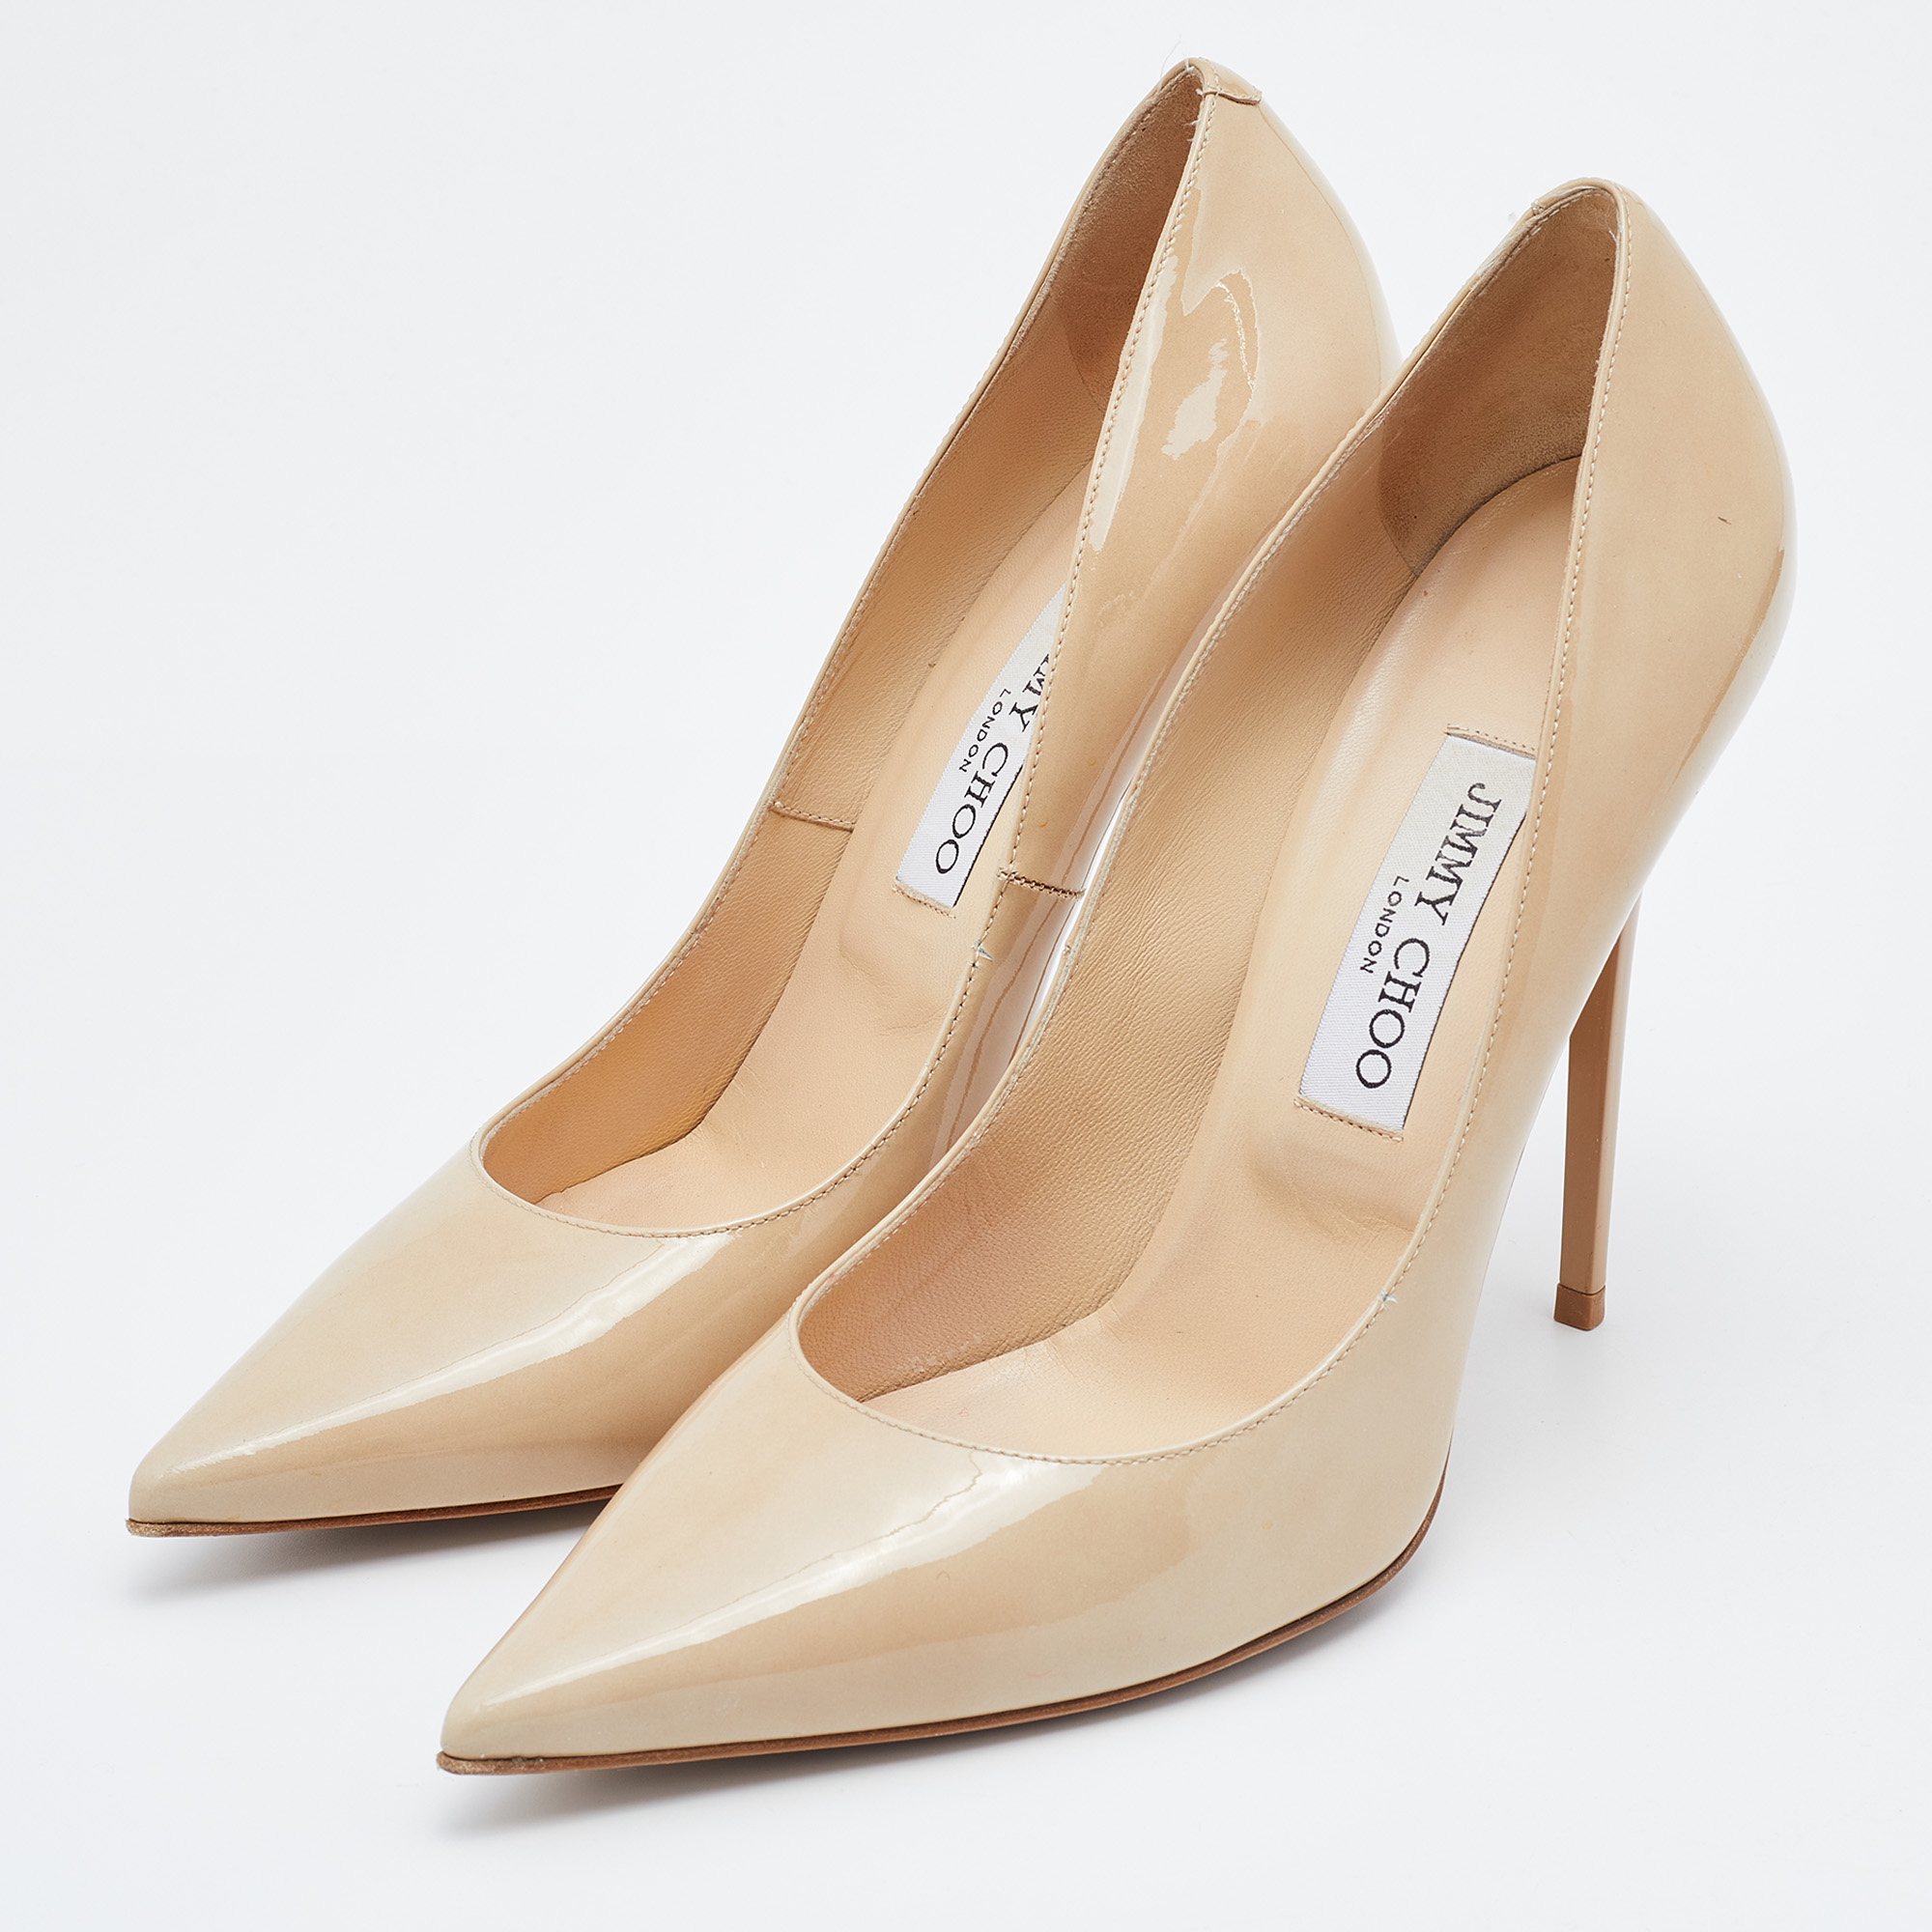 

Jimmy Choo Nude Beige Patent Leather Romy Pointed Toe Pumps Size